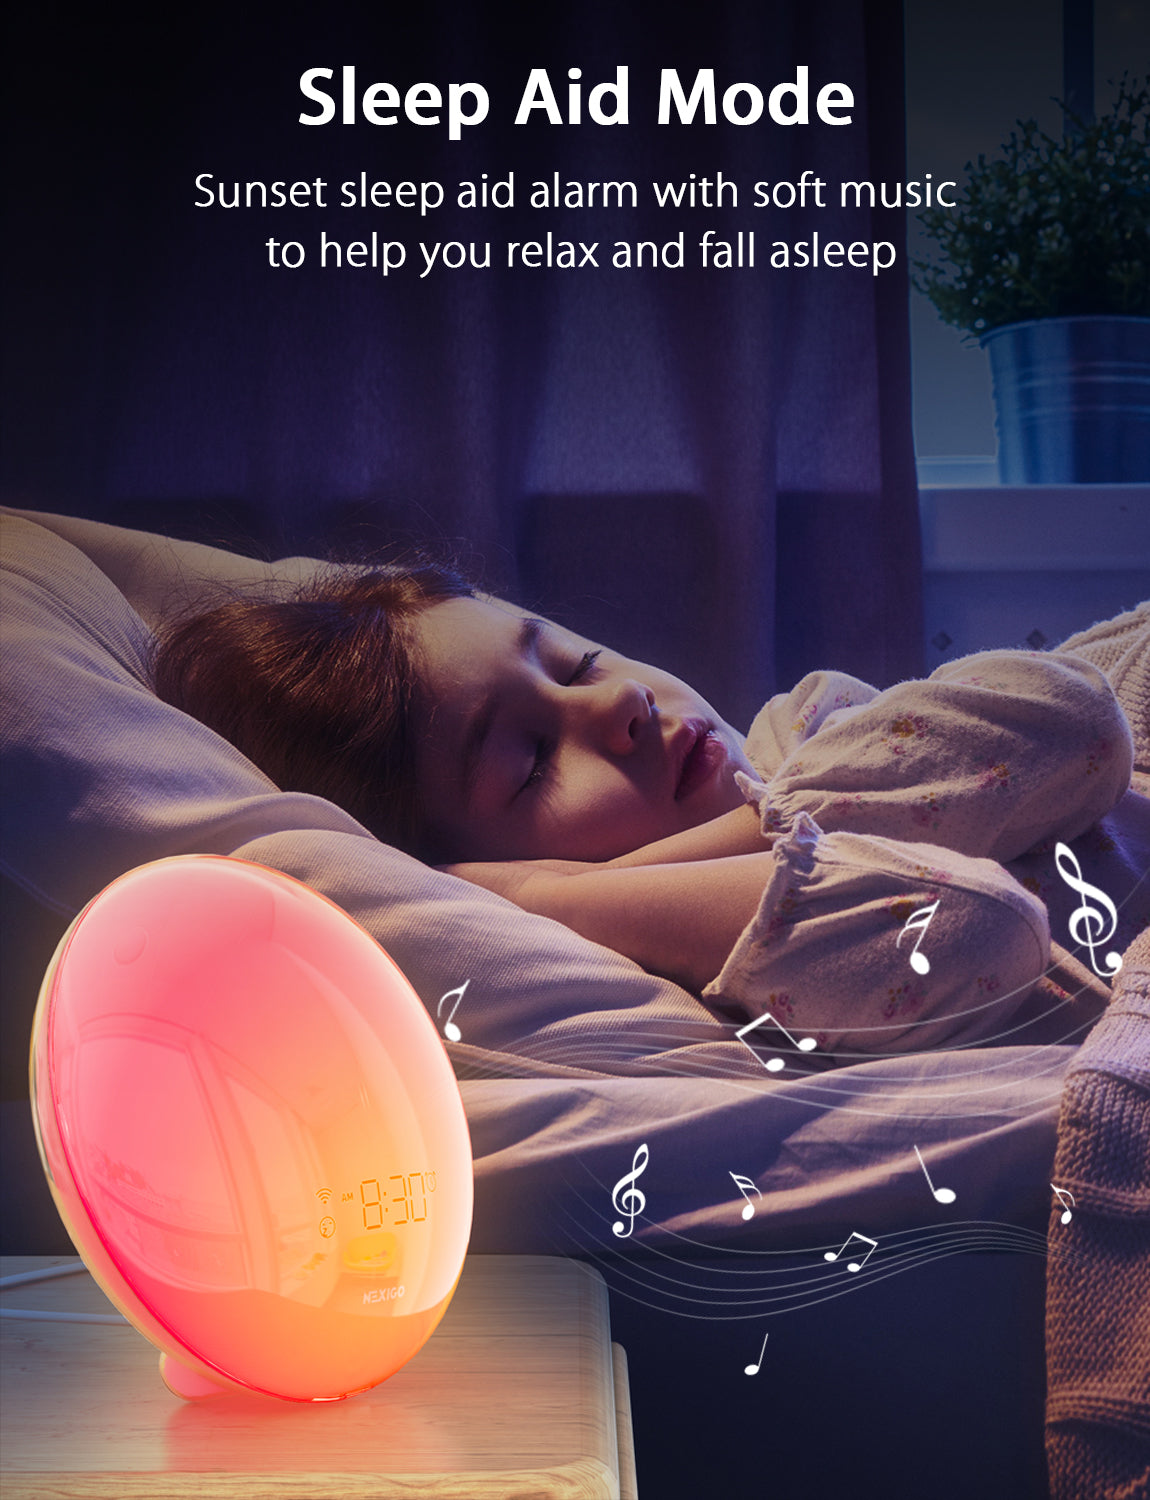 Alarm clock with Sleep Aid Mode plays soothing music to assist with sleep.